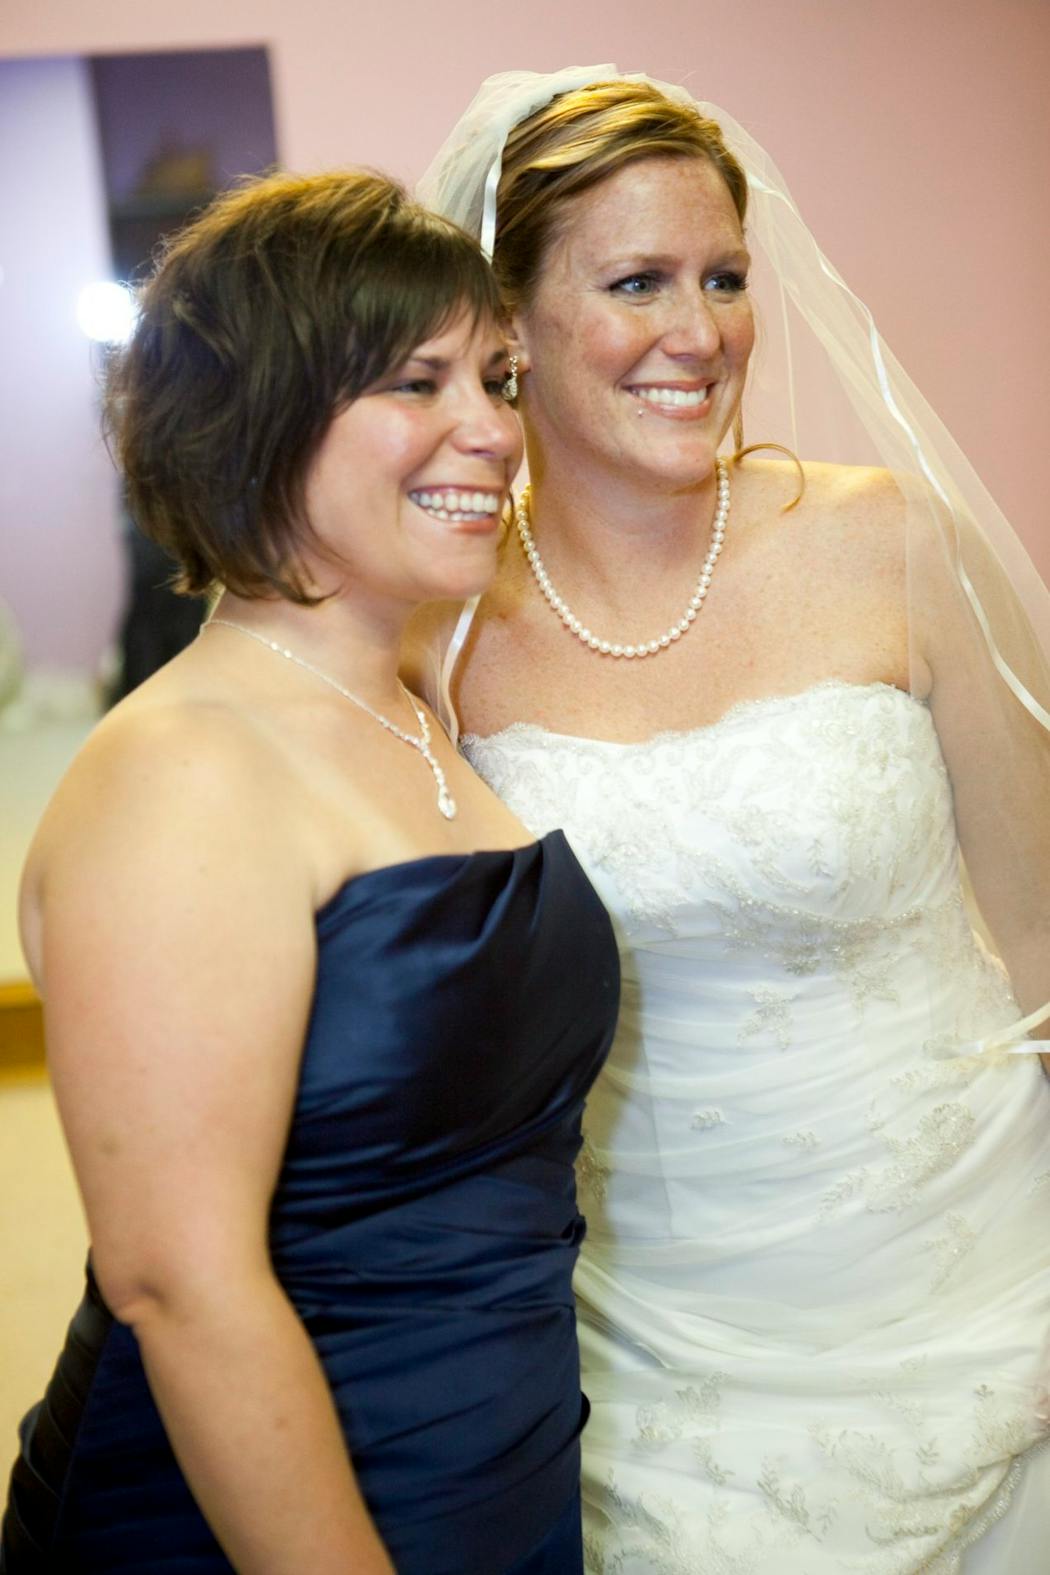 When Abbey Bryduck, right, got married in 2009, her best friend from camp, Carrie Bush, stood by her side as her maid of honor.